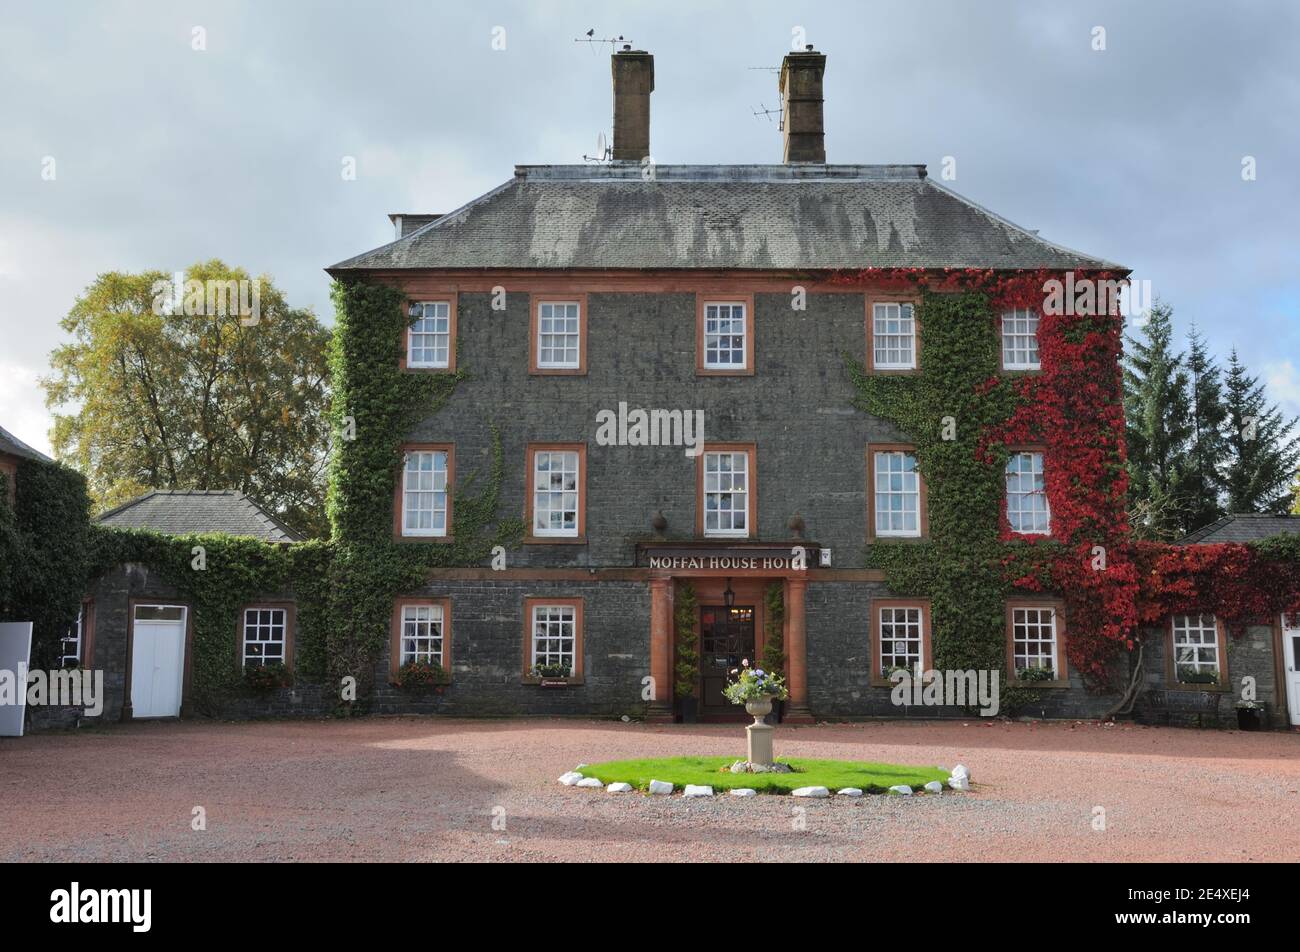 The Best Western, Moffat House Hotel entrance and courtyard adorned with red and green ivy in Moffat, Borders, Scotland Stock Photo